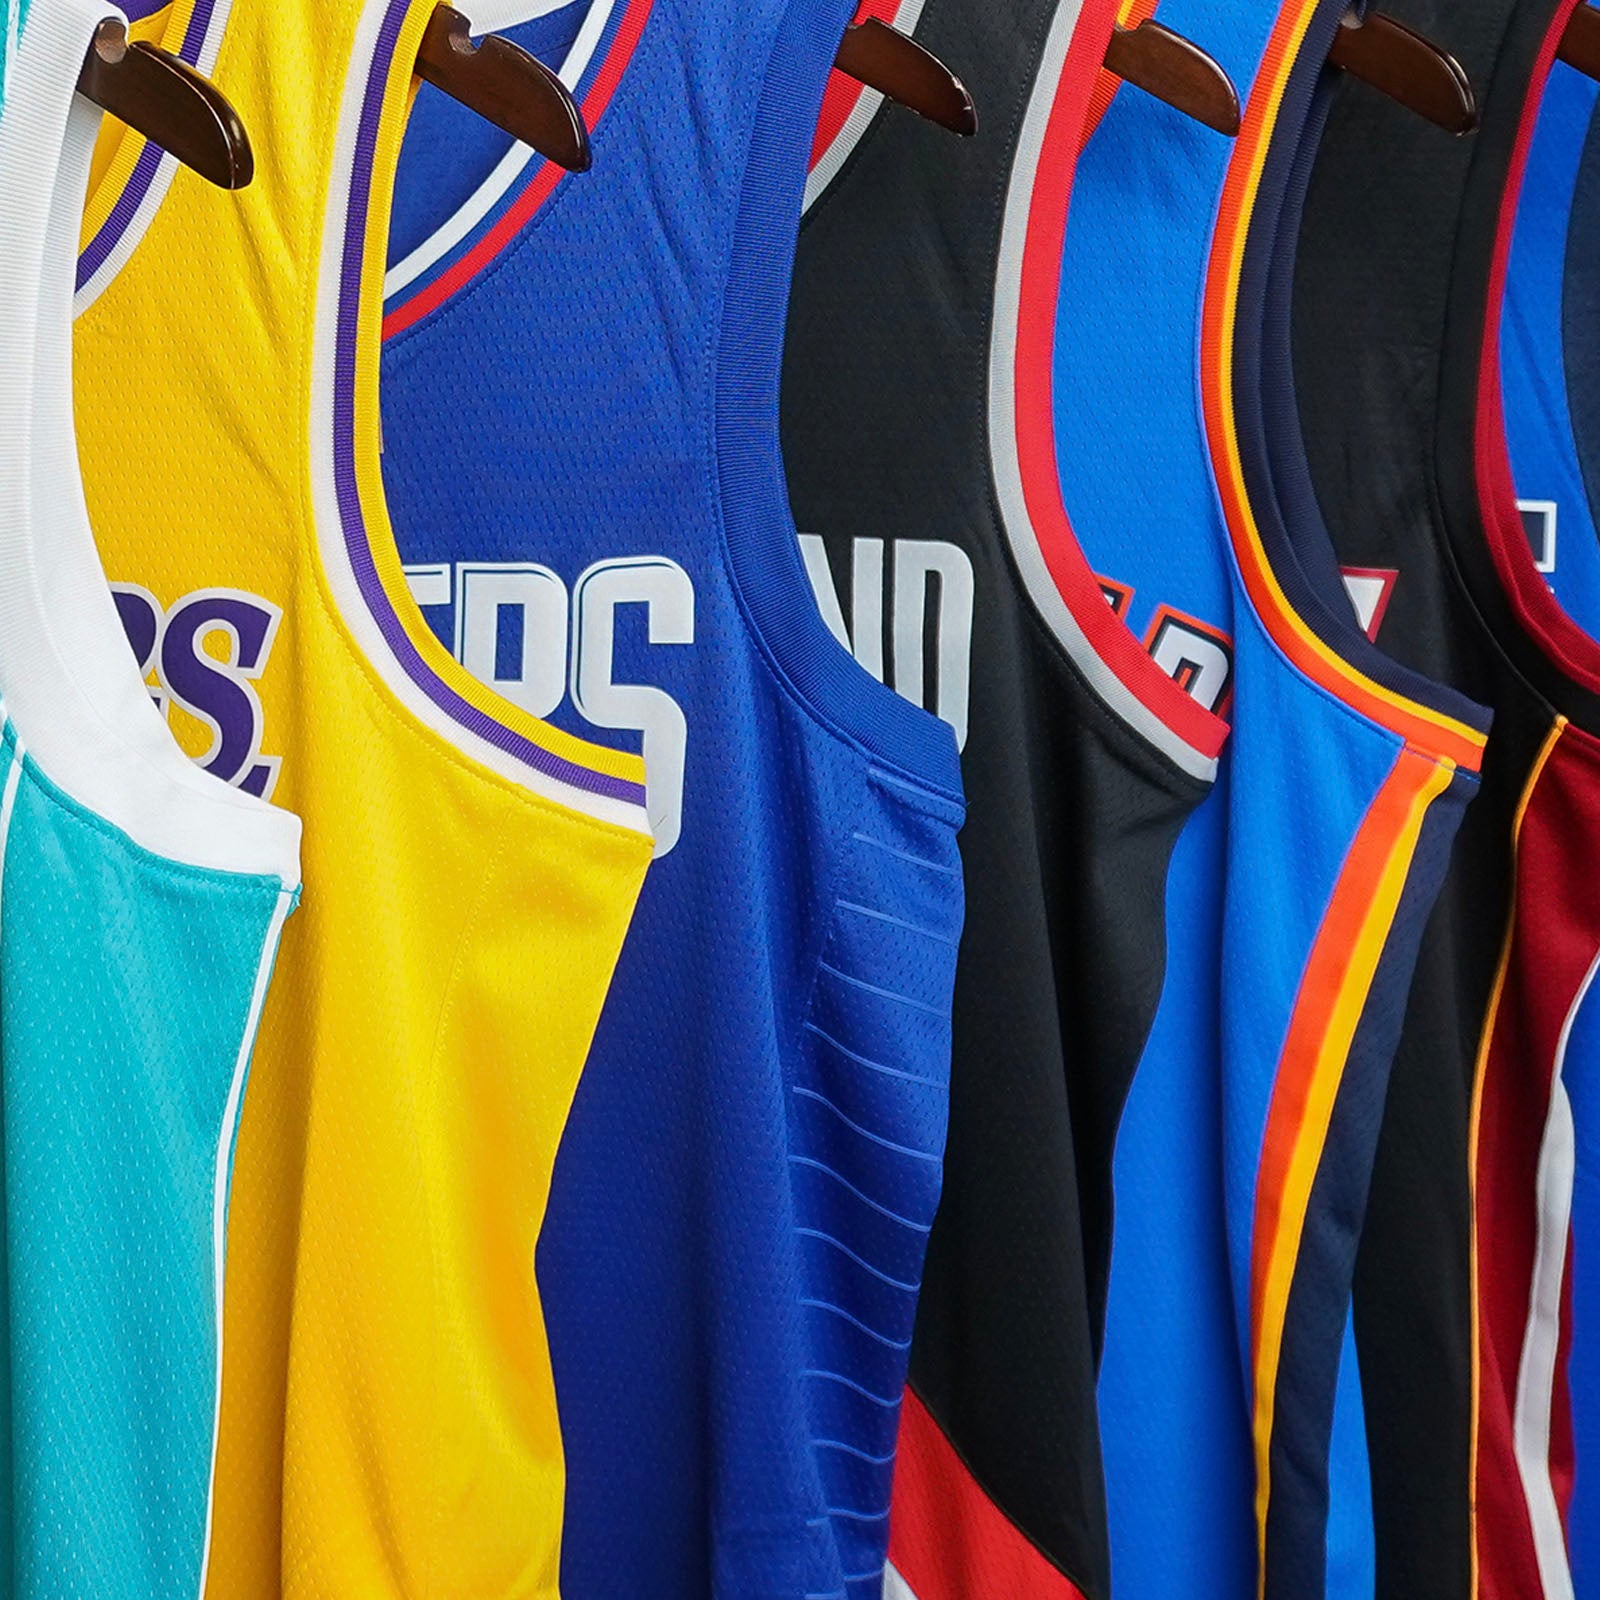 Mitchell & Ness Jerseys are Made for Summer - Lids